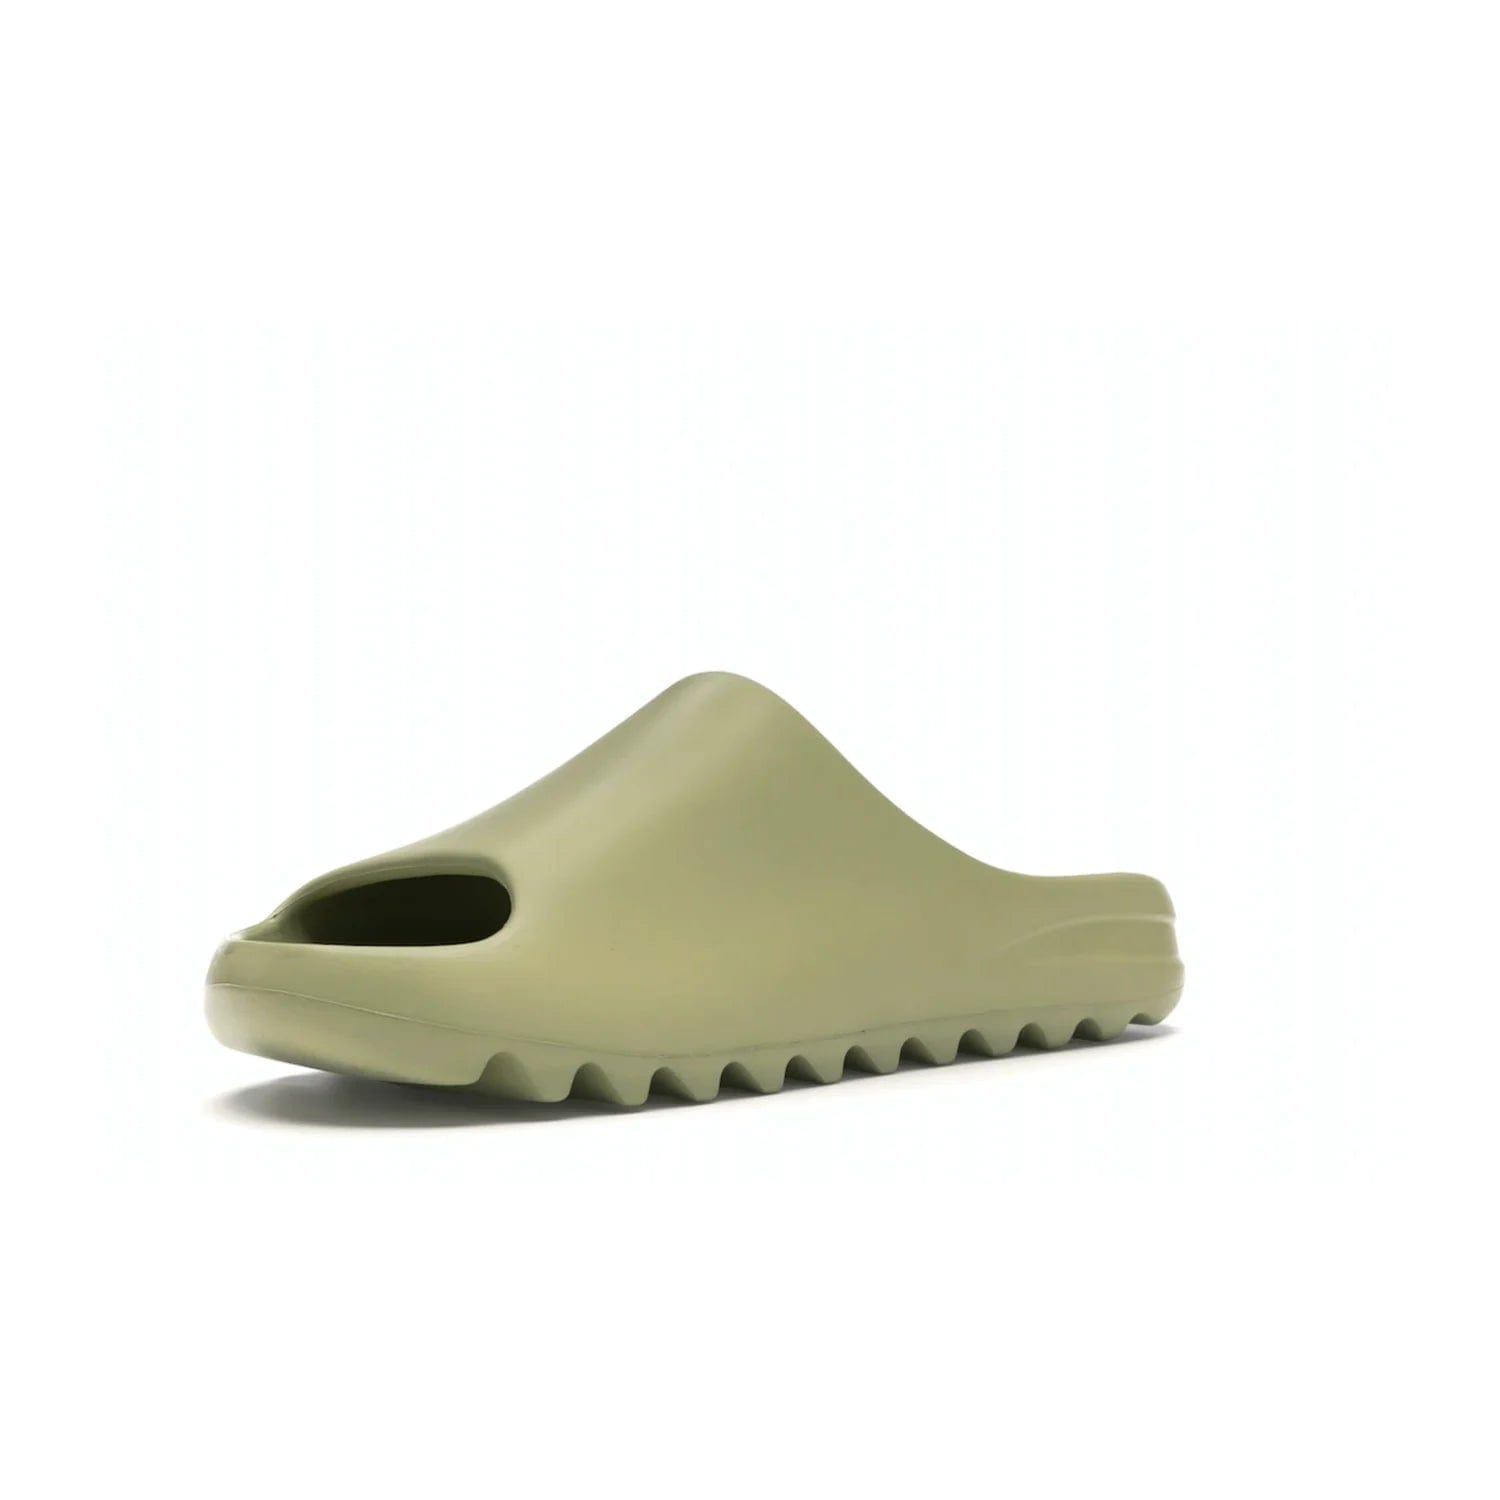 adidas Yeezy Slide Resin (2019/2021) - Image 15 - Only at www.BallersClubKickz.com - Step into fashion and function with the adidas Yeezy Slide Resin. Featuring a lightweight Resin EVA foam construction and an outsole with accentuated grooves for traction and support. The latest release is available in a Resin/Resin/Resin colorway, combining modern aesthetics and classic style. Step into style with the adidas Yeezy Slide Resin and be the trend-setter this season.